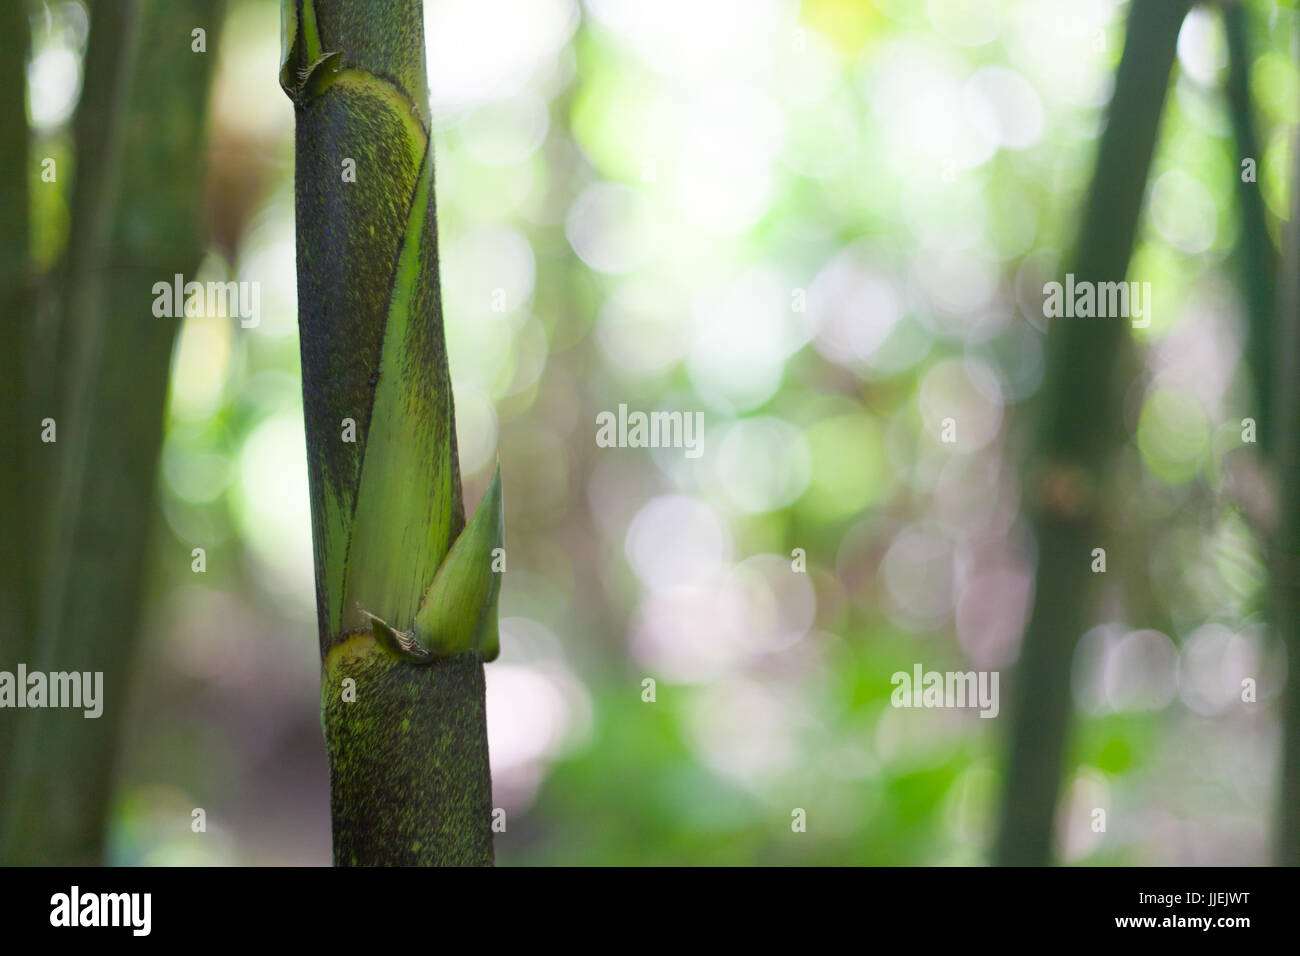 Background of Bamboo and Bananas Plants in Vietnam Mekong Delta Village Stock Photo